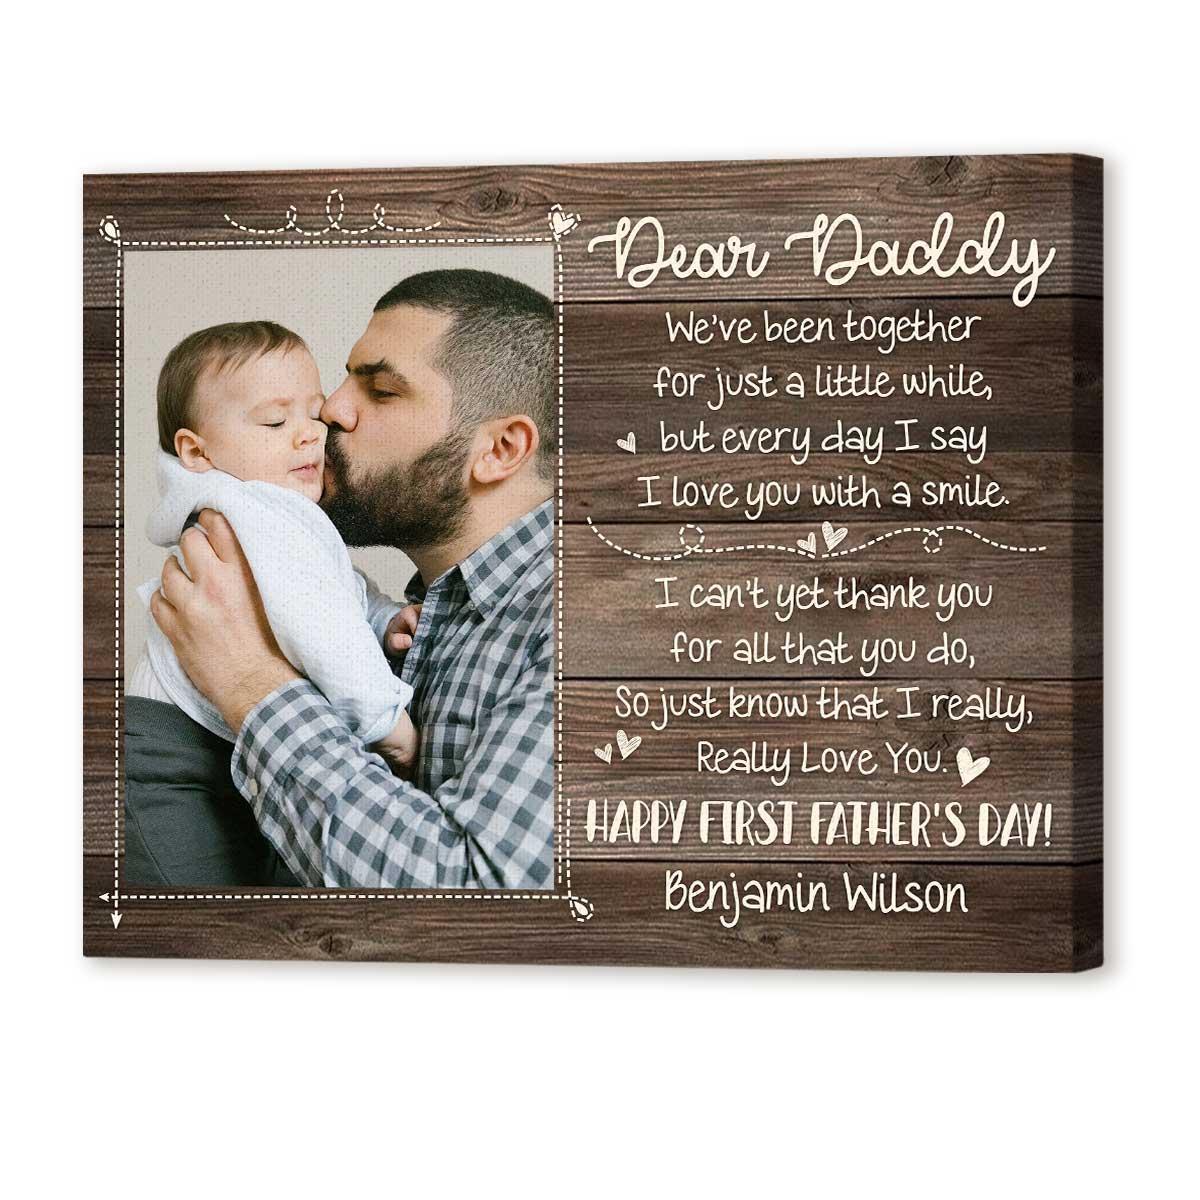 12 Great Gifts For The New Dad In Your Life | LittleThings.com